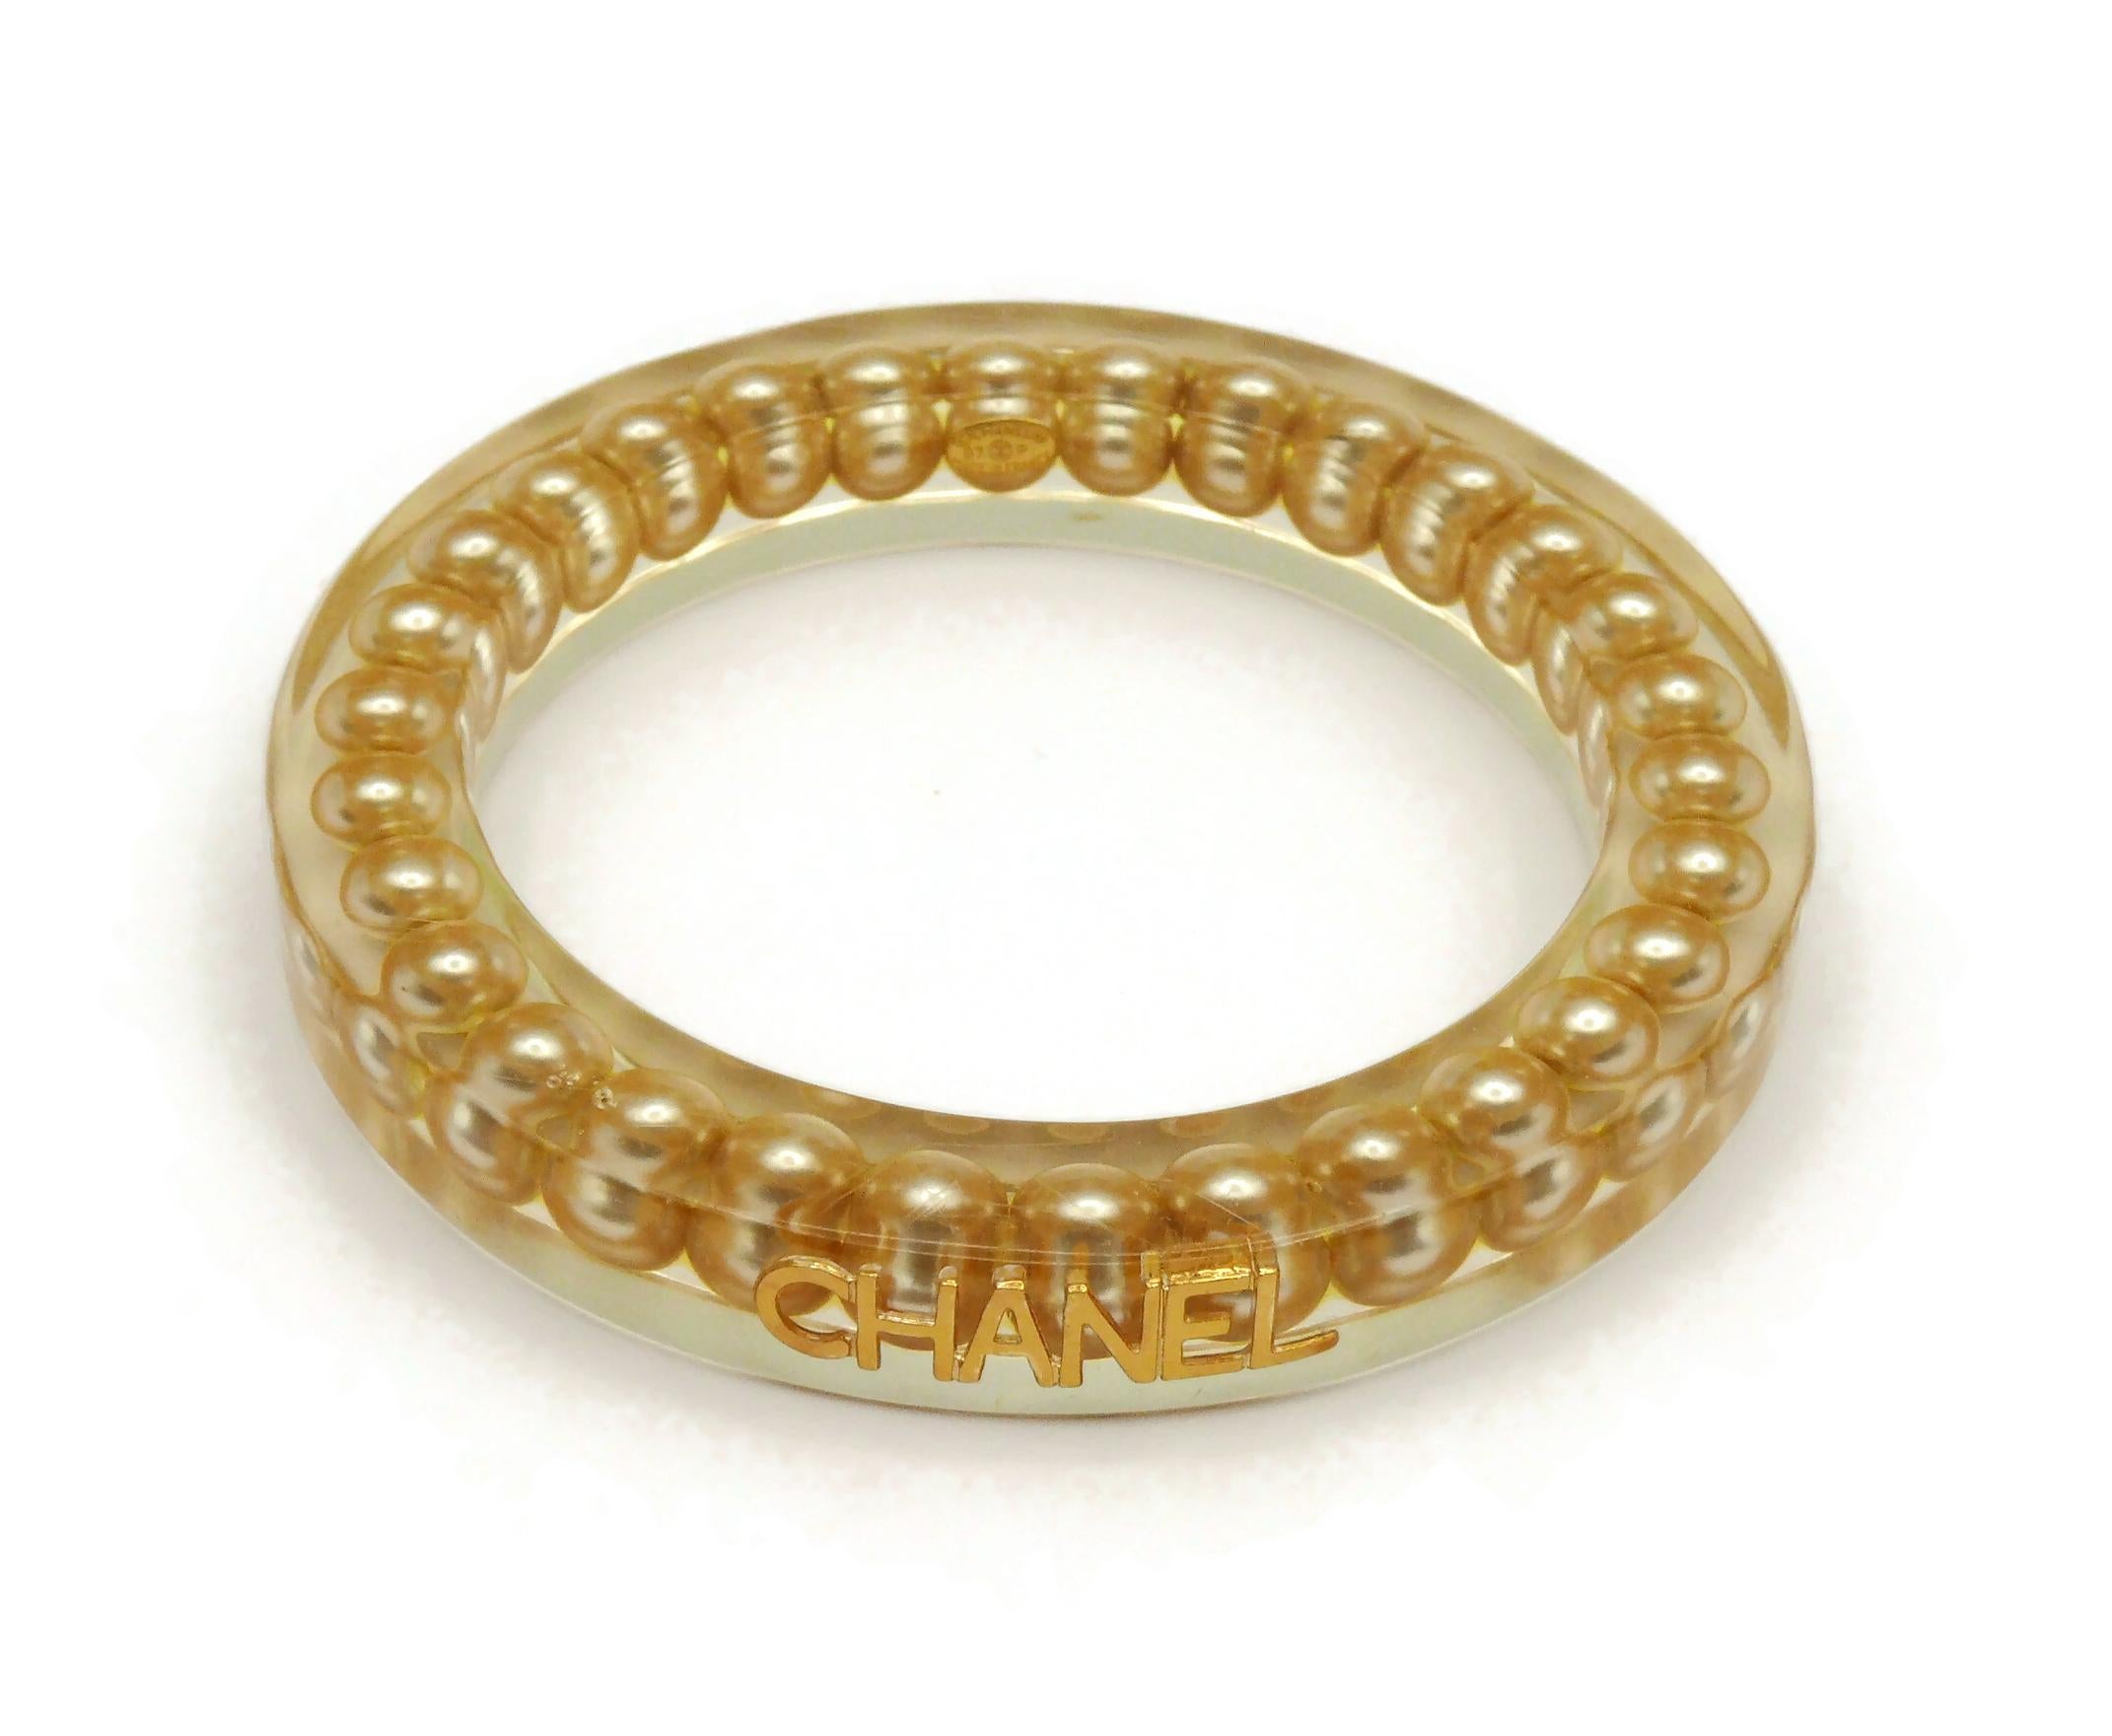 CHANEL by KARL LAGERFELD Vintage Lucite Pearl Inlaid Bangle, Spring 1997 In Good Condition For Sale In Nice, FR